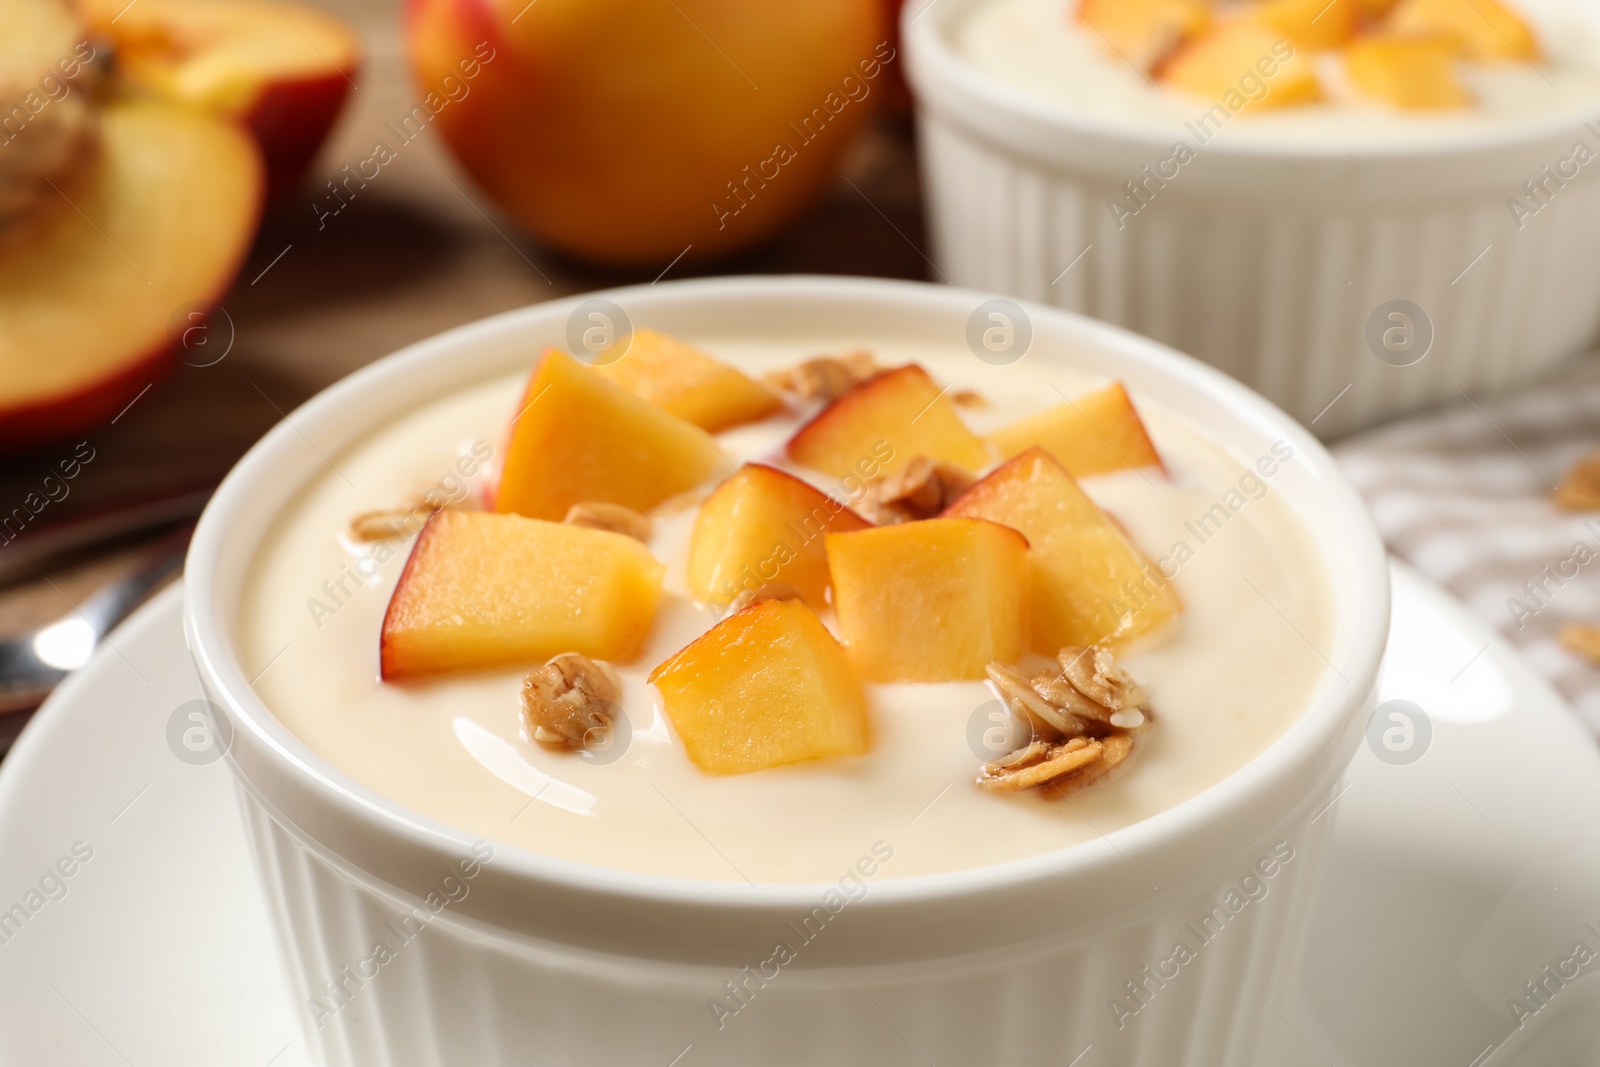 Photo of Tasty peach yogurt with granola and pieces of fruit in bowl on plate, closeup